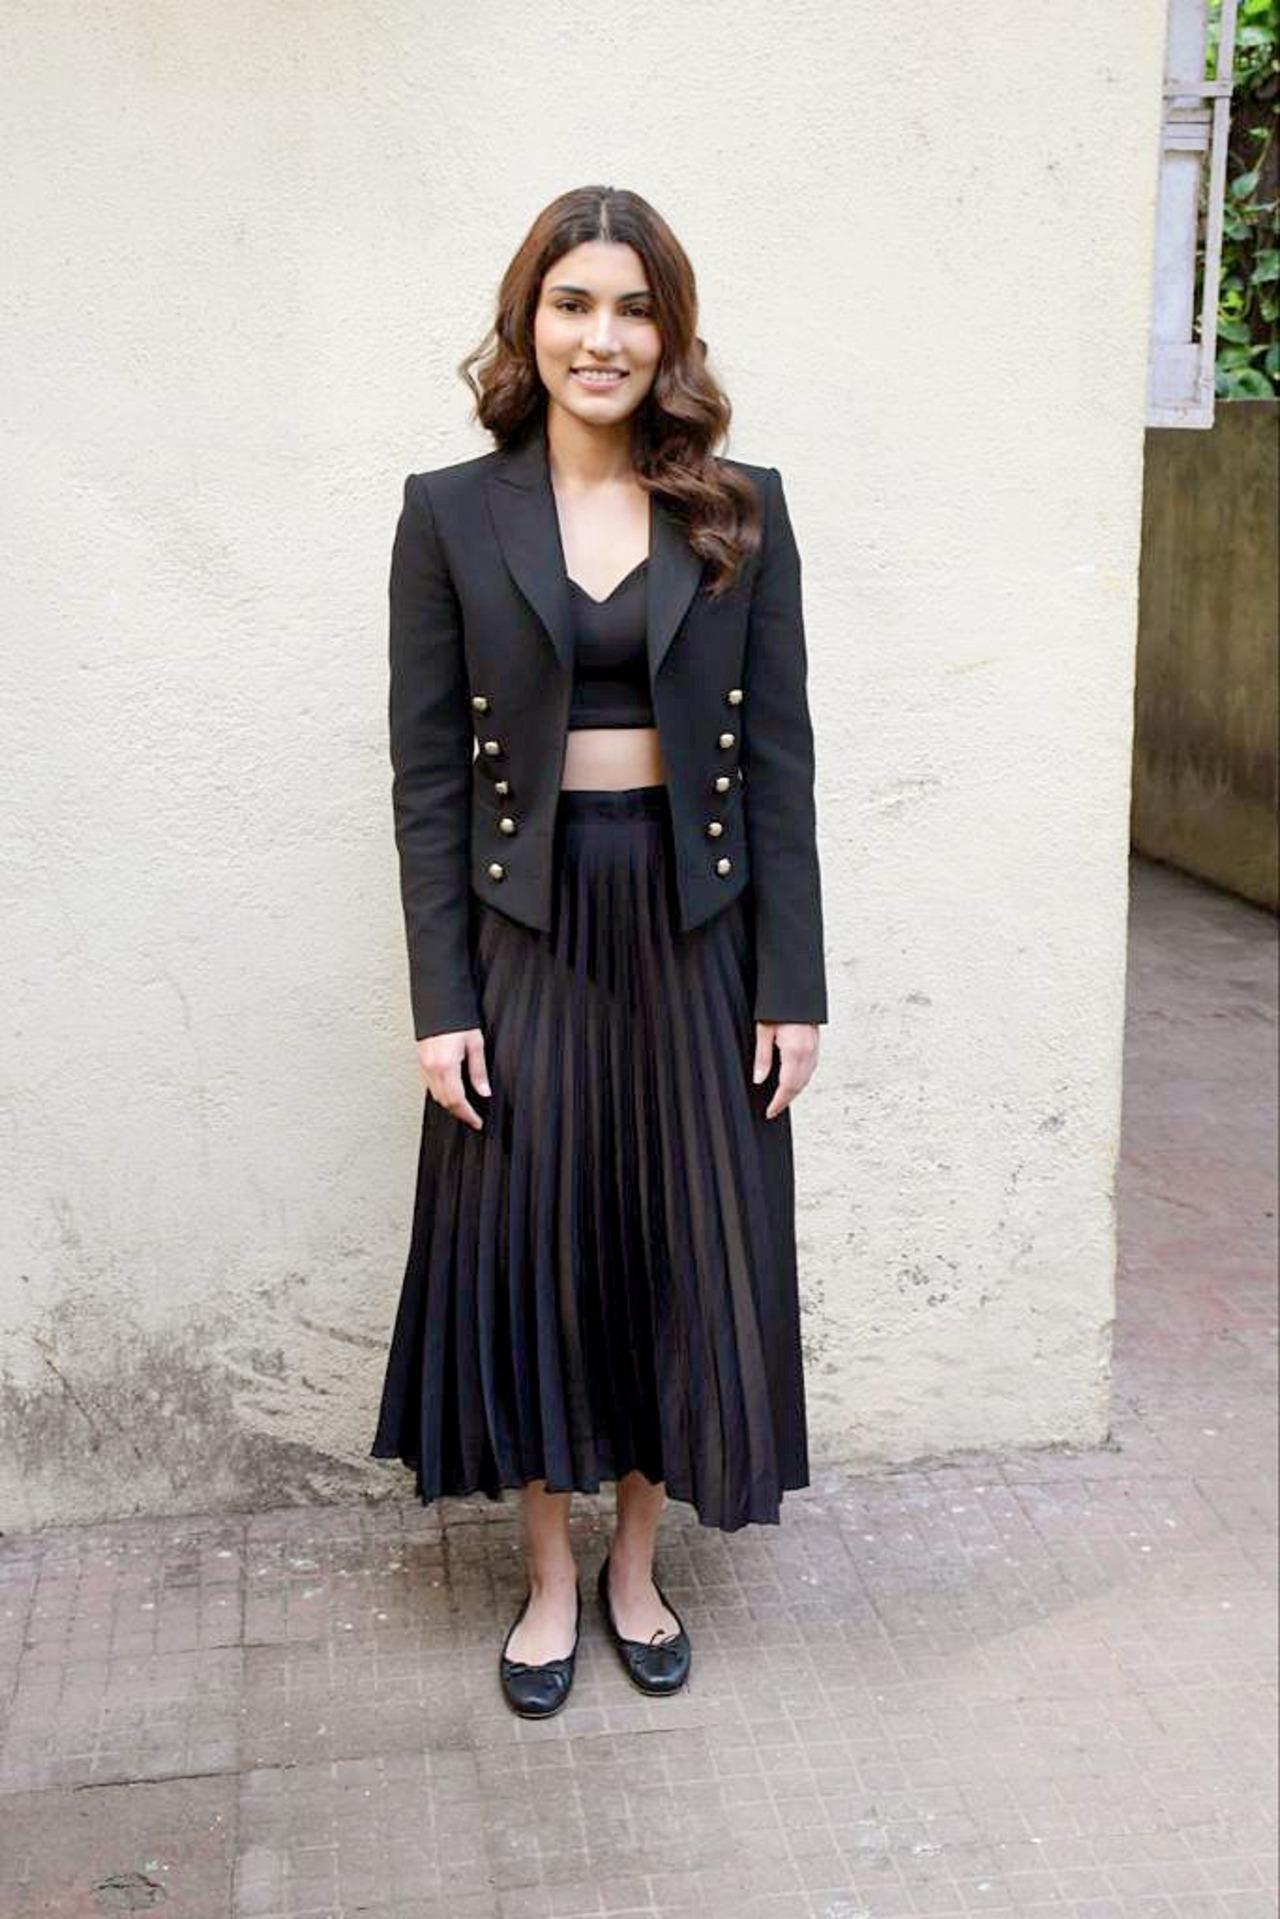 Debutant Alizeh Agnihotri stepped out in the city in a black dress for the promotions of the film